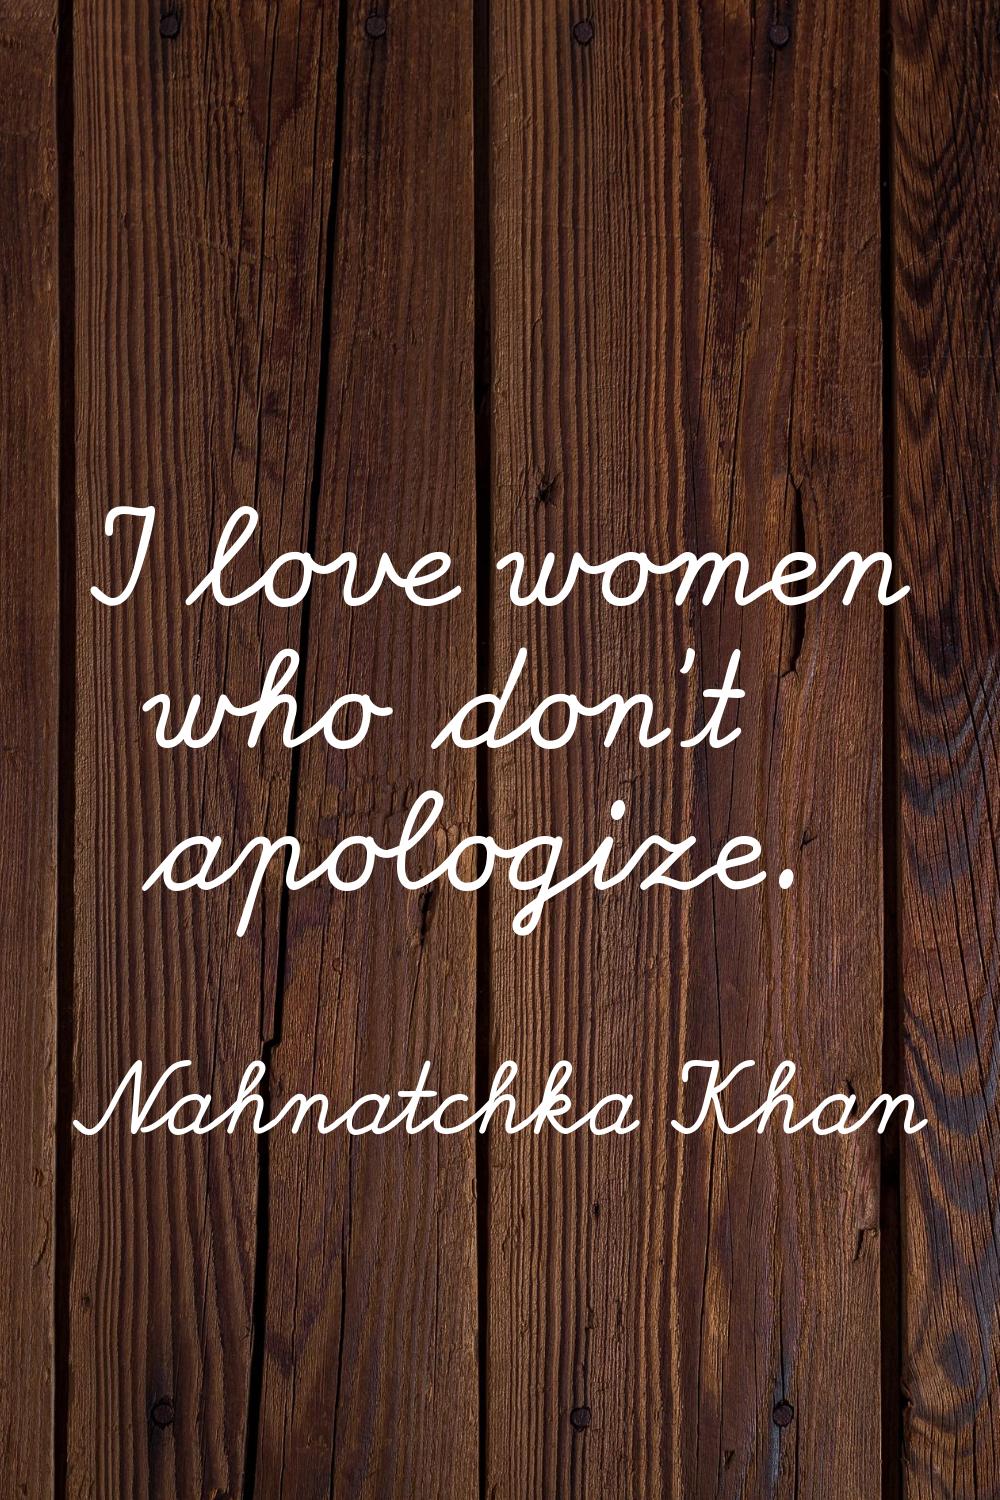 I love women who don't apologize.